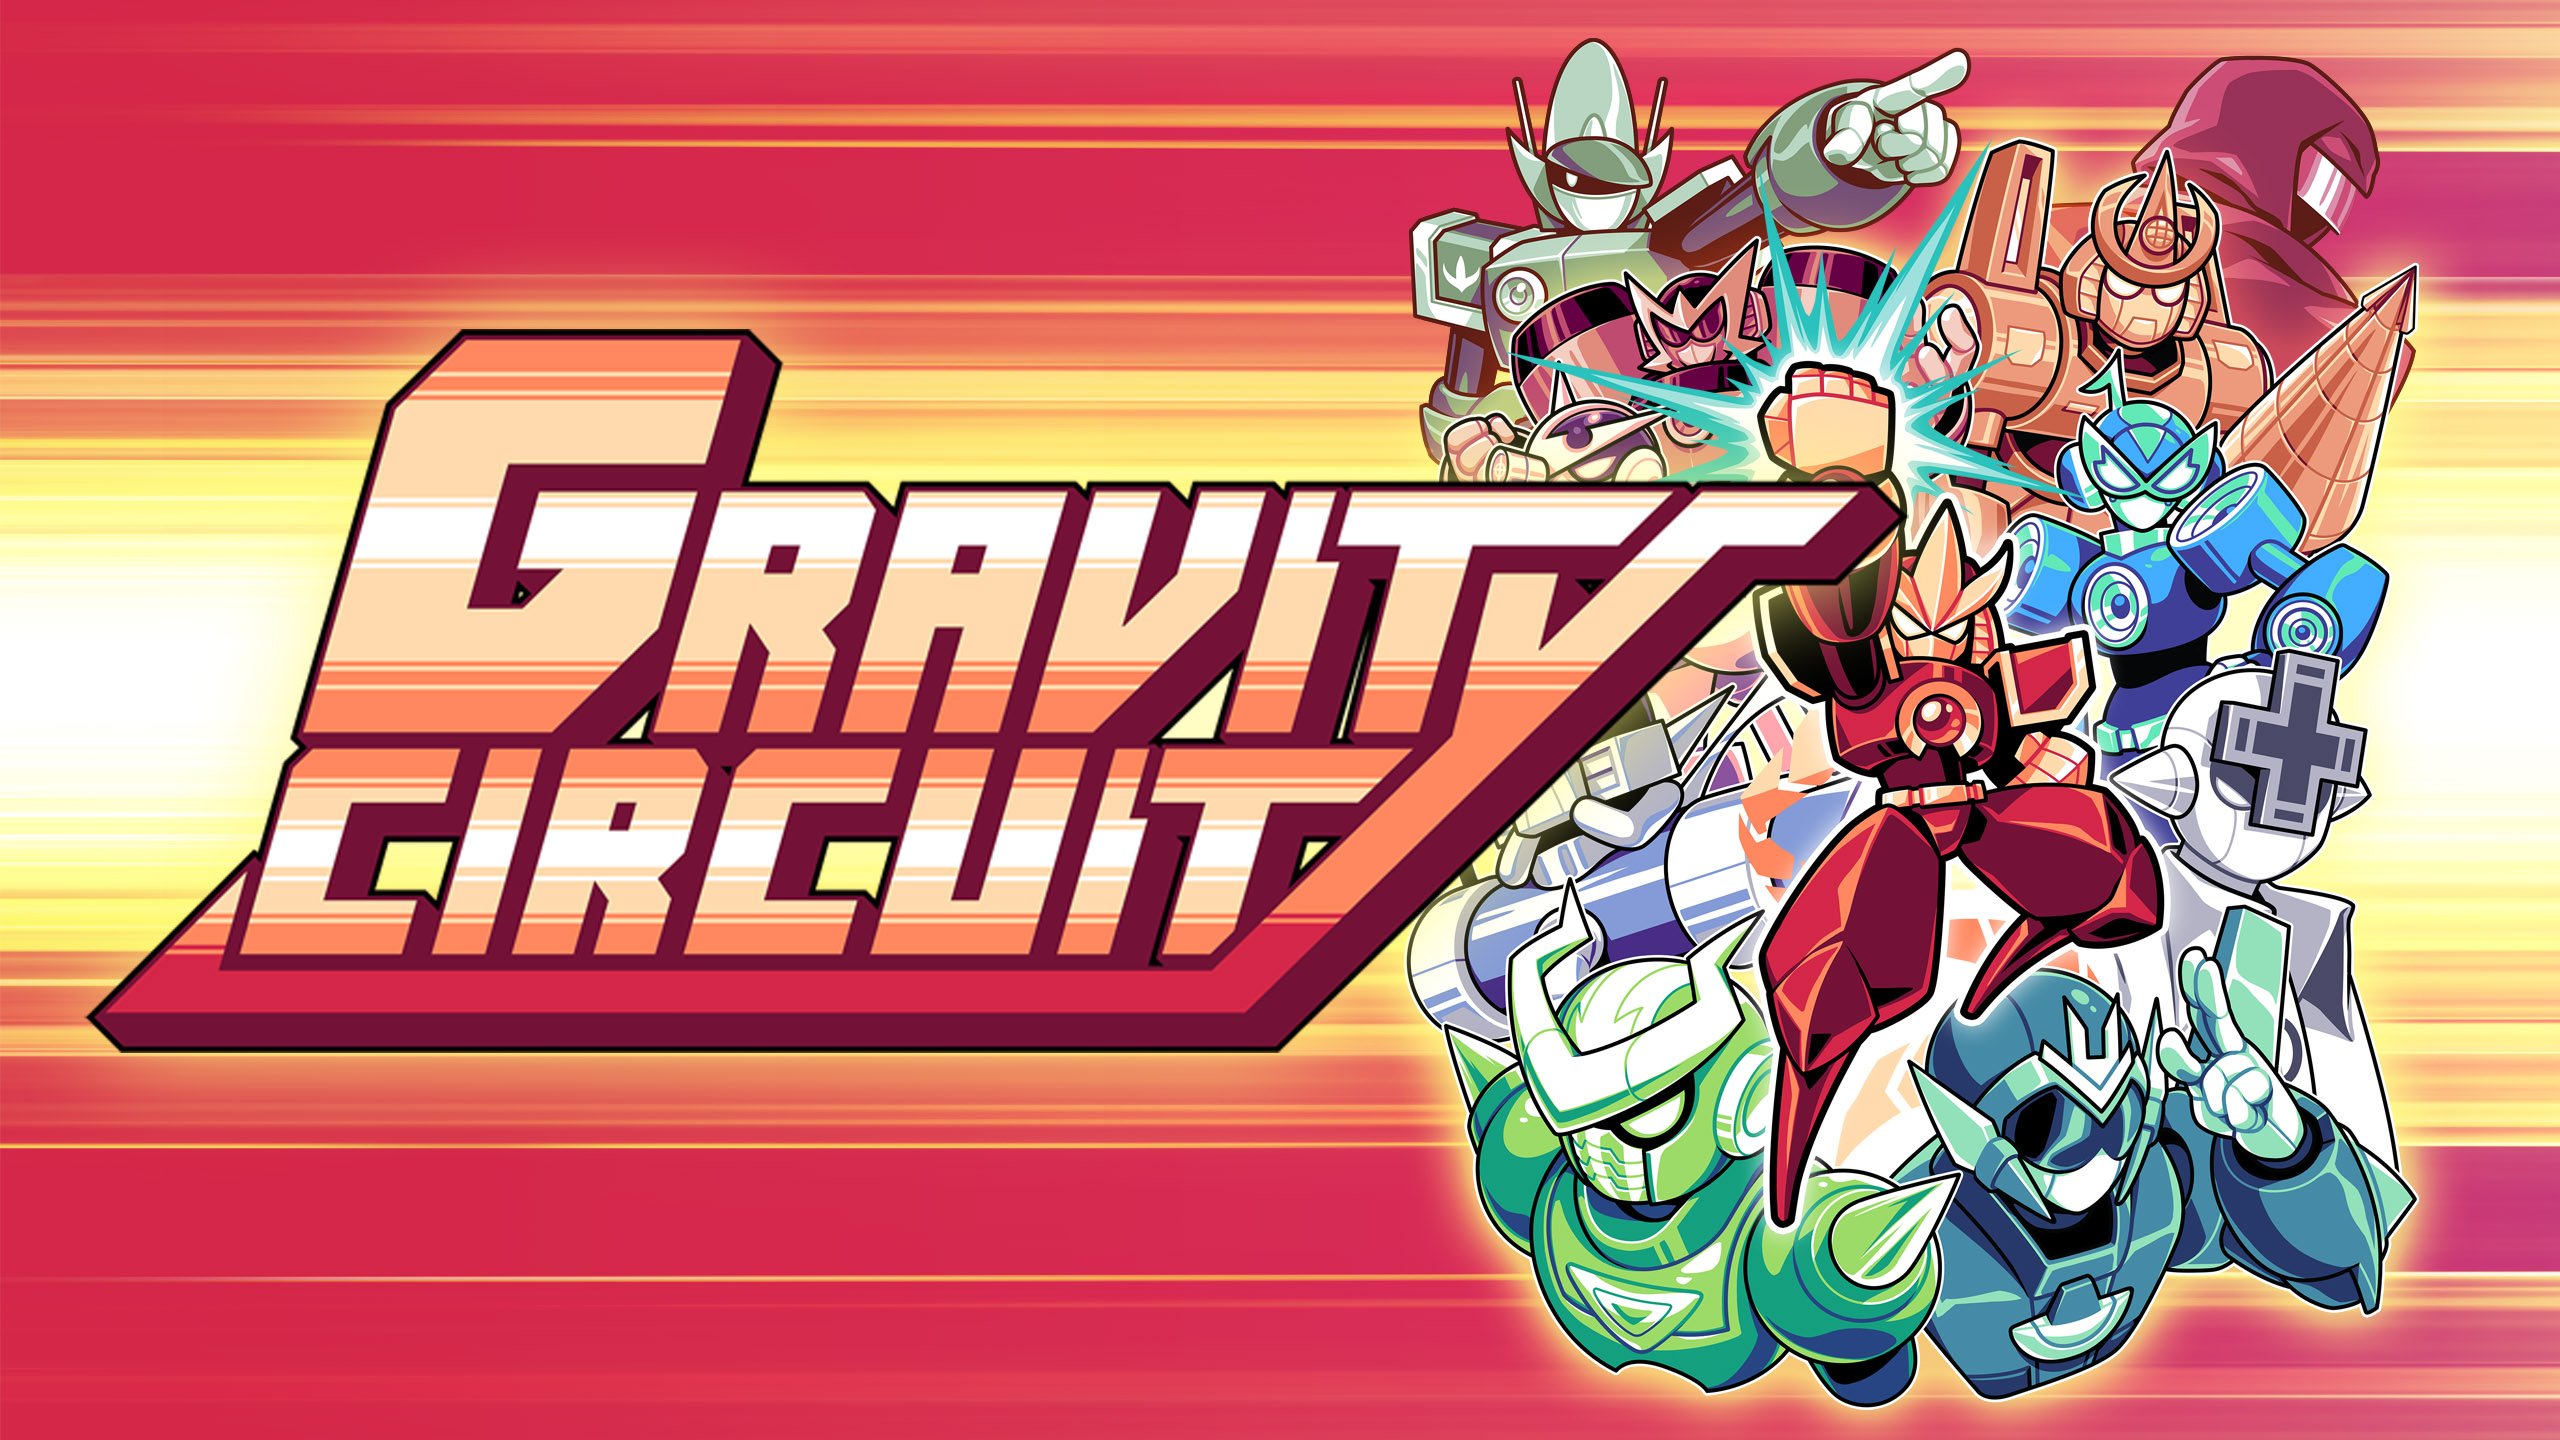 #
      Side-scrolling action platformer Gravity Circuit coming to PS5, PS4, Switch, and PC in 2023